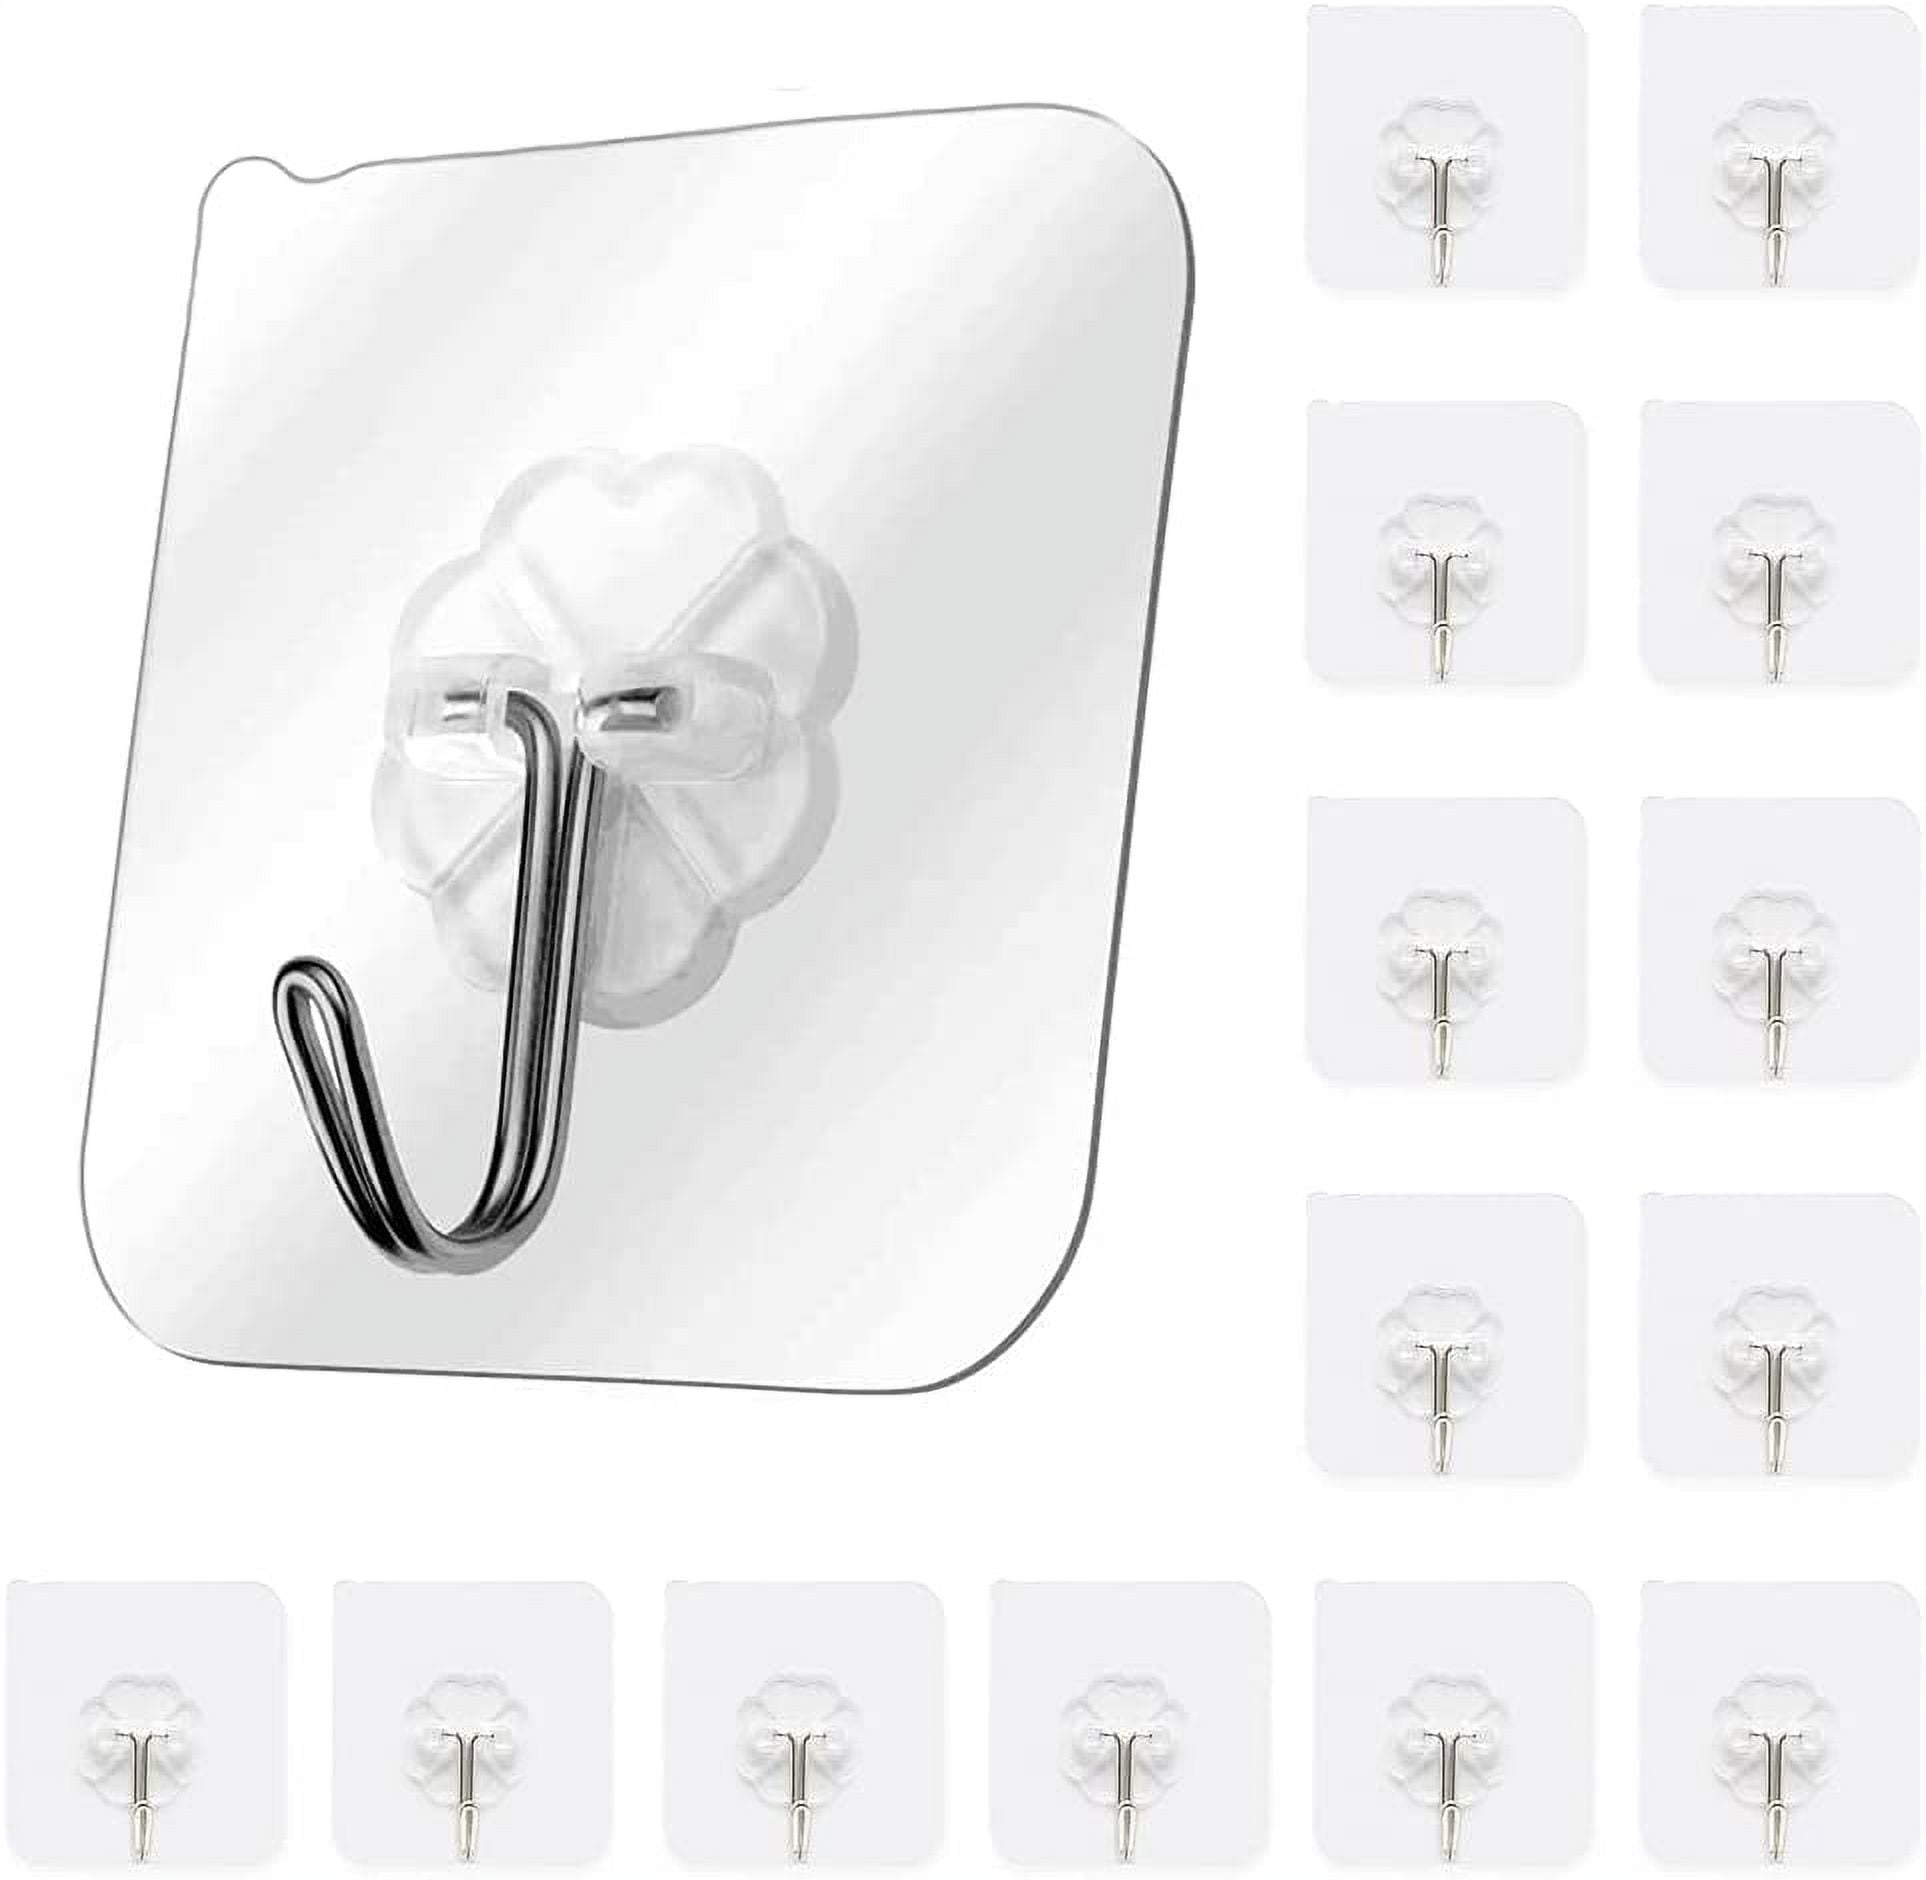 Honmein 6 Pcs Adhesive Wall Hooks for Hanging - Waterproof Shower Hooks,  Heavy Duty Towel Hooks for Bathrooms, Kitchens, and Offices (Silver) 